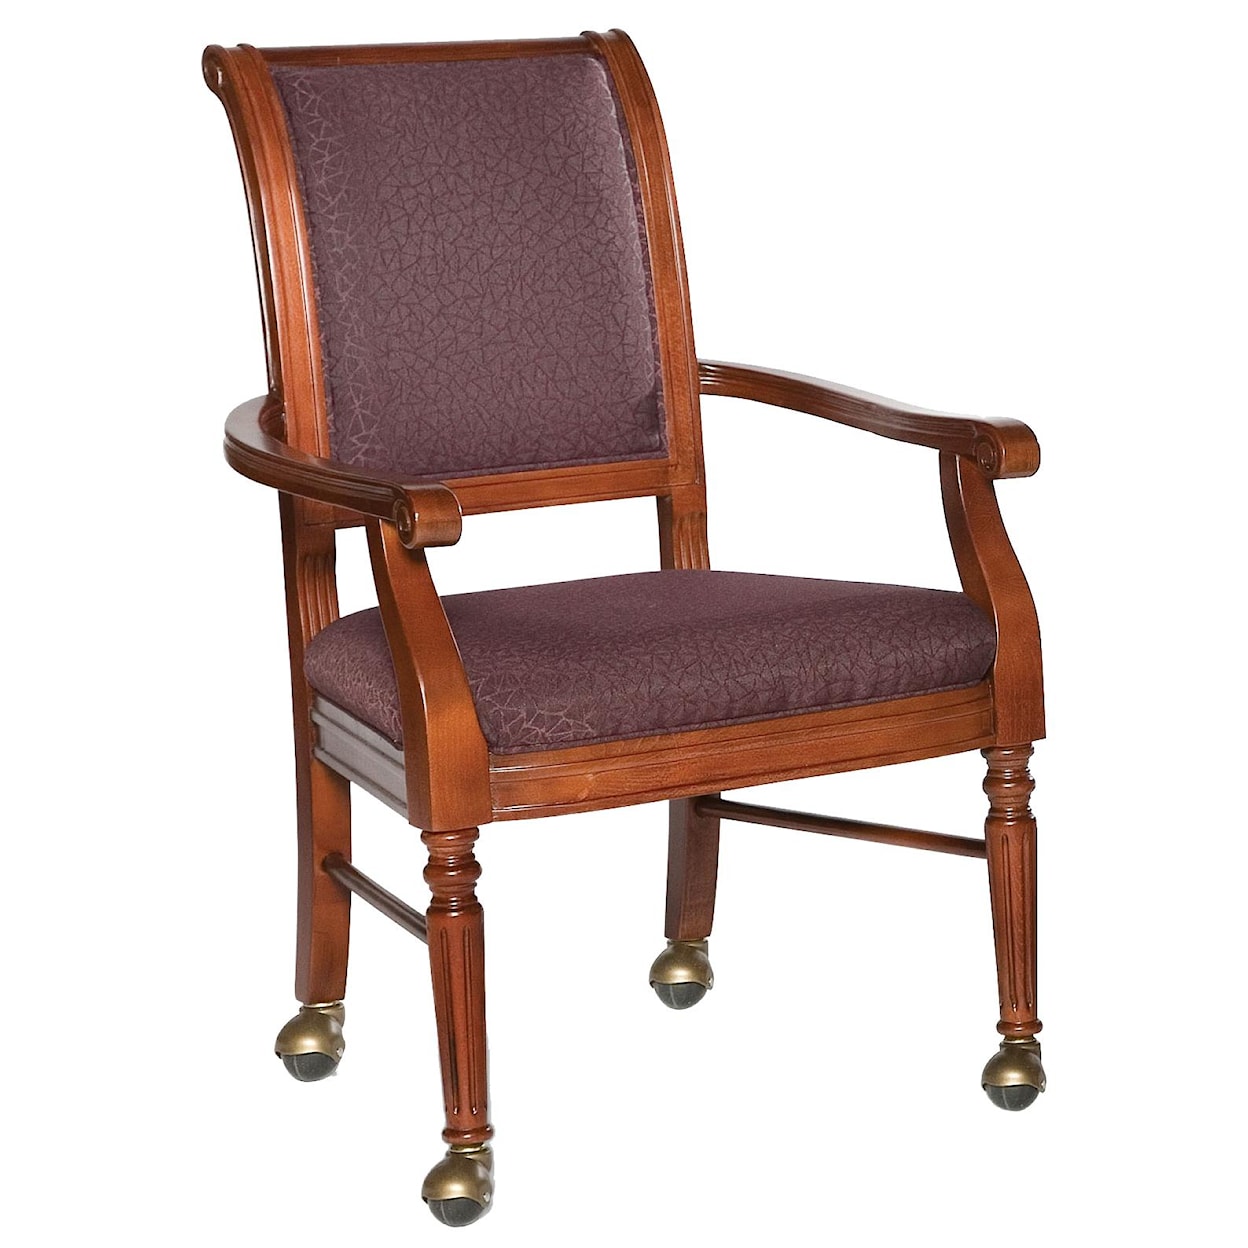 Fairfield Chairs Picture Frame Chair with Leg Casters